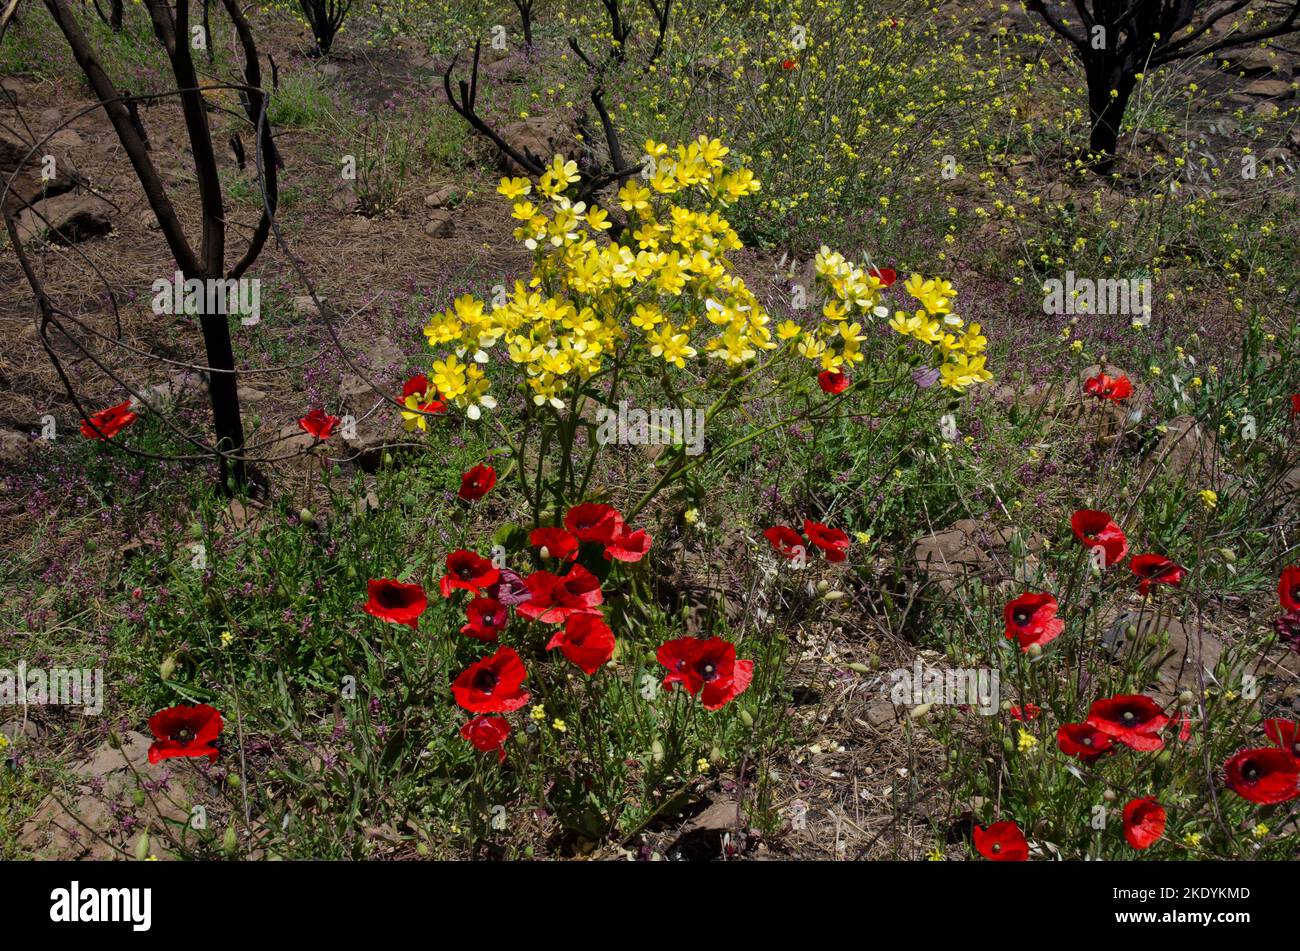 Common poppies P. rhoeas, Azores buttercup R. cortusifolius and shortpod mustard H. incana in bloom. Gran Canaria. Canary Islands. Spain. Stock Photo